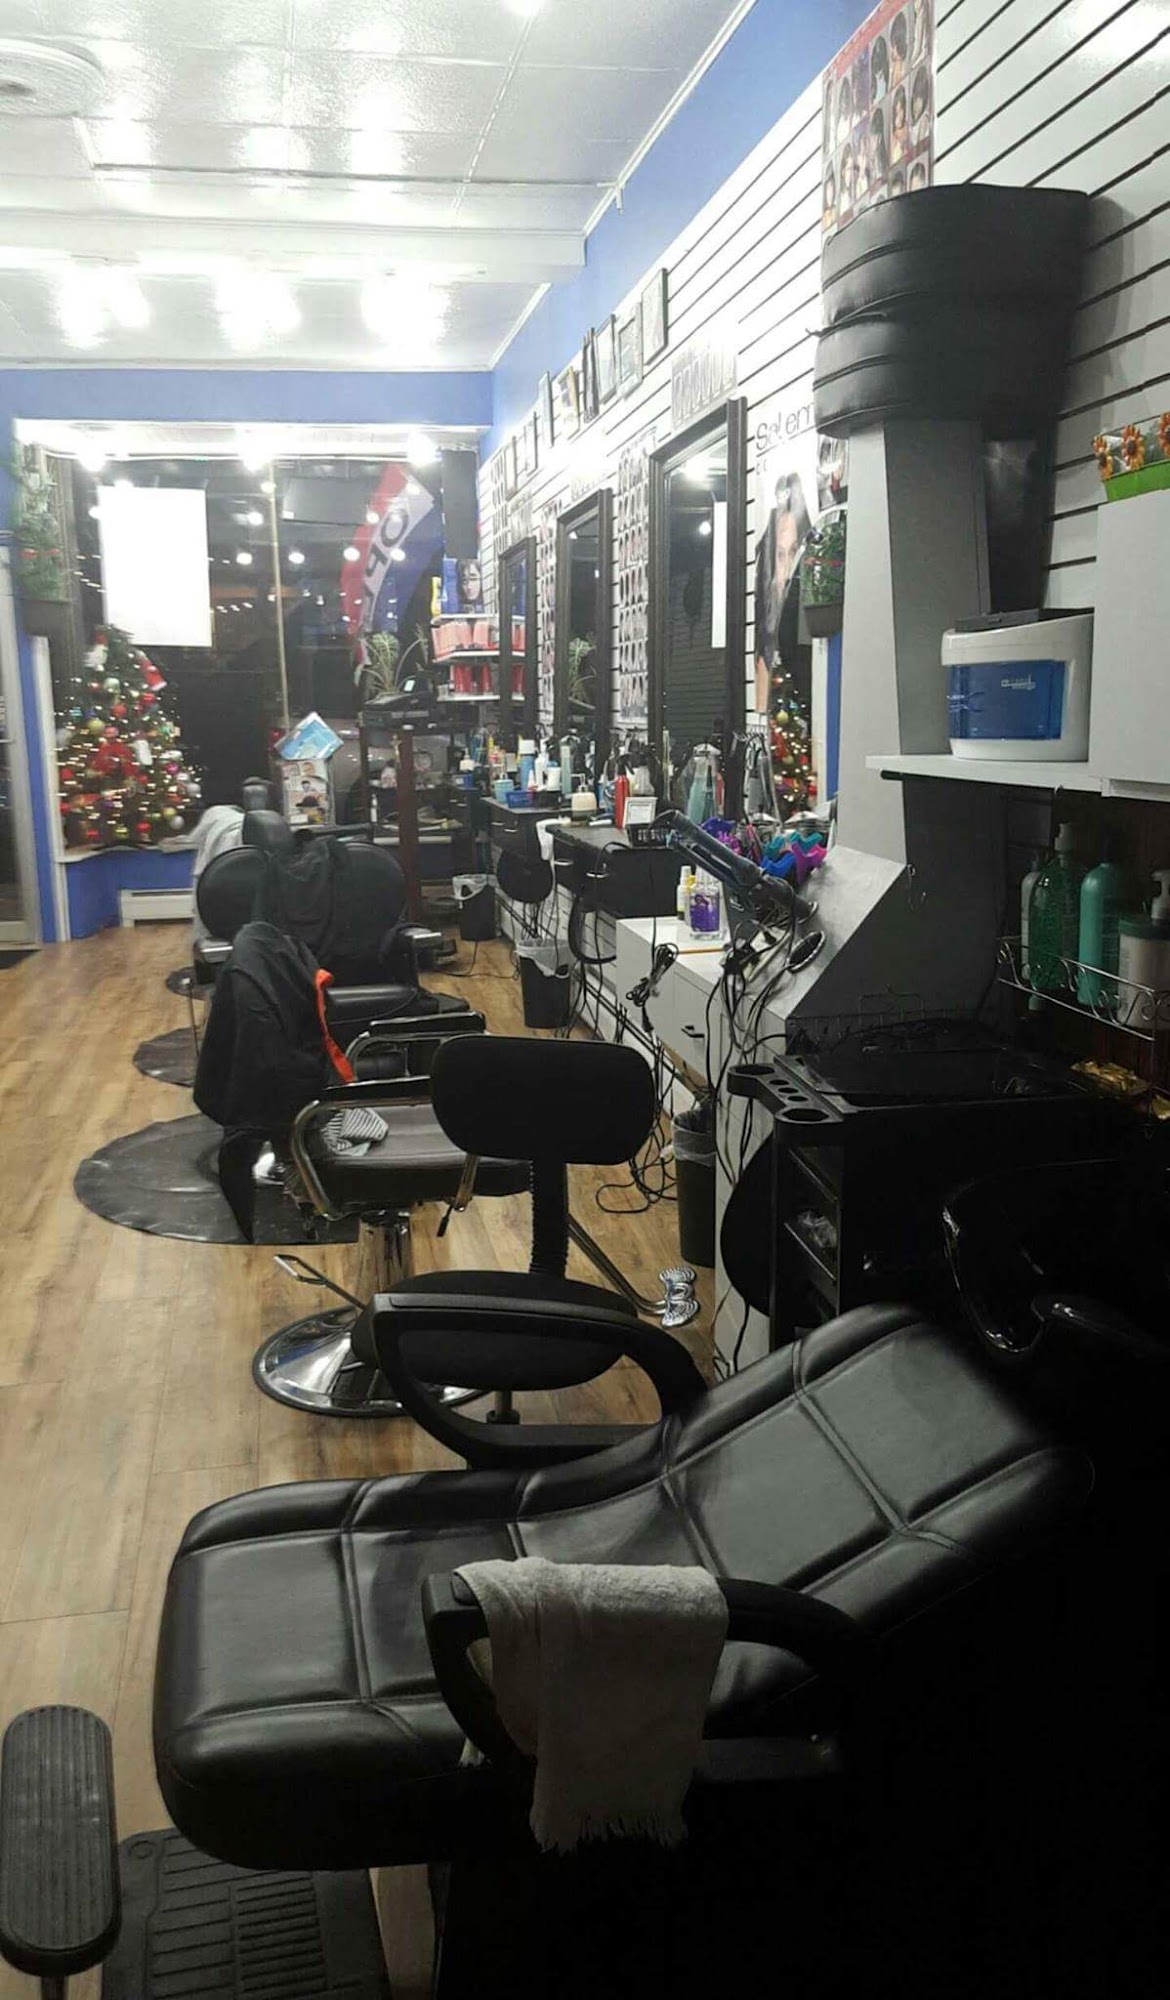 Anthony's And Cary's Barber Shop 611 Main St, Great Barrington Massachusetts 01230